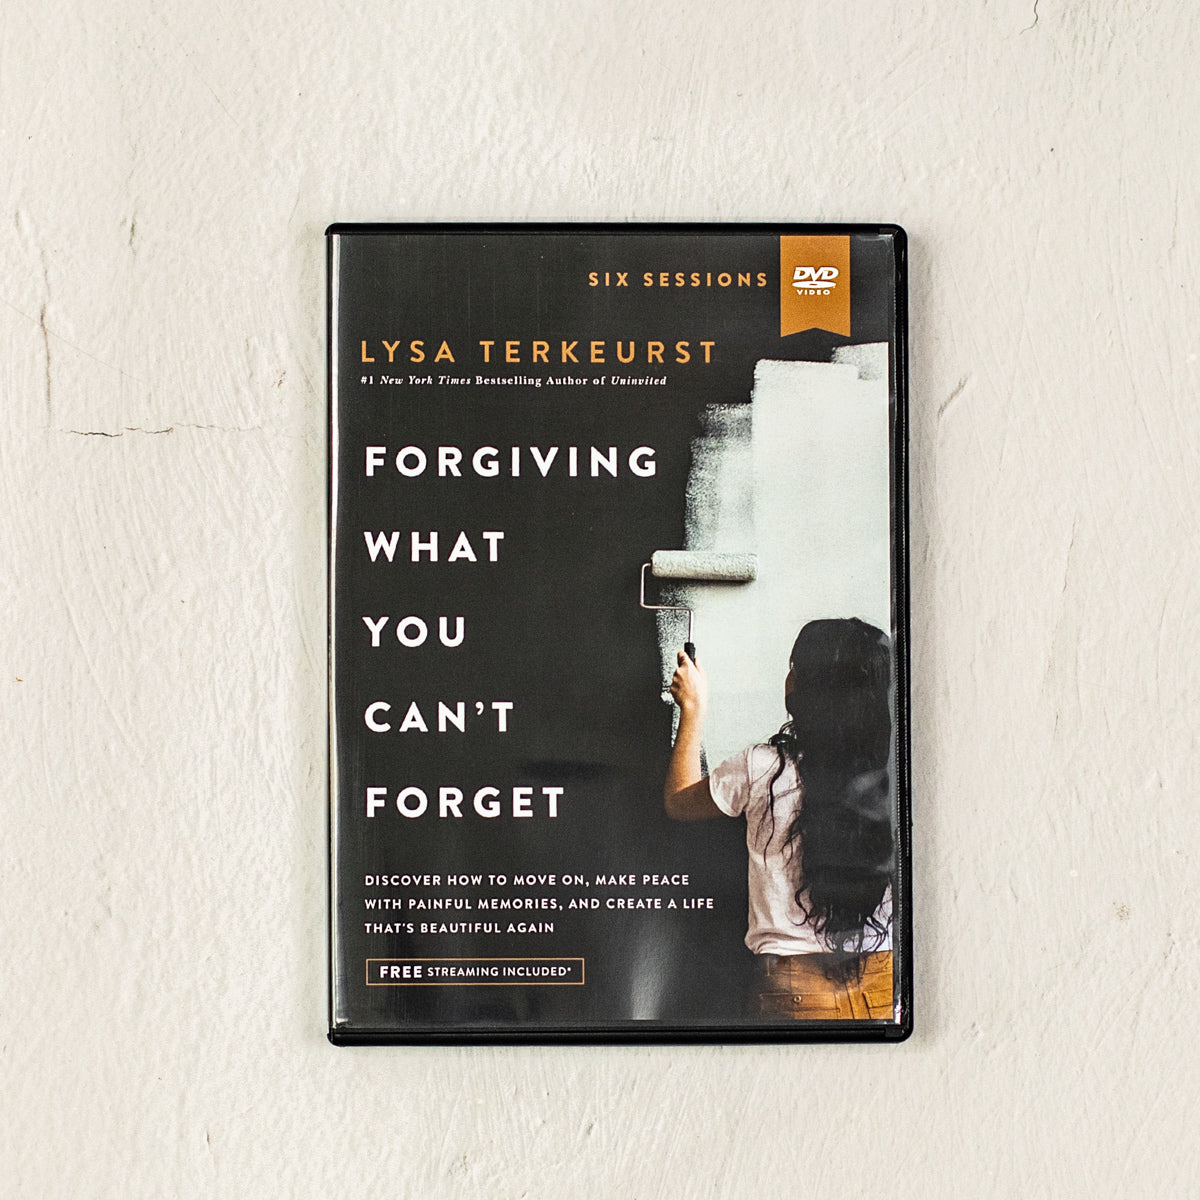 Forgiving What You Can't Forget DVD